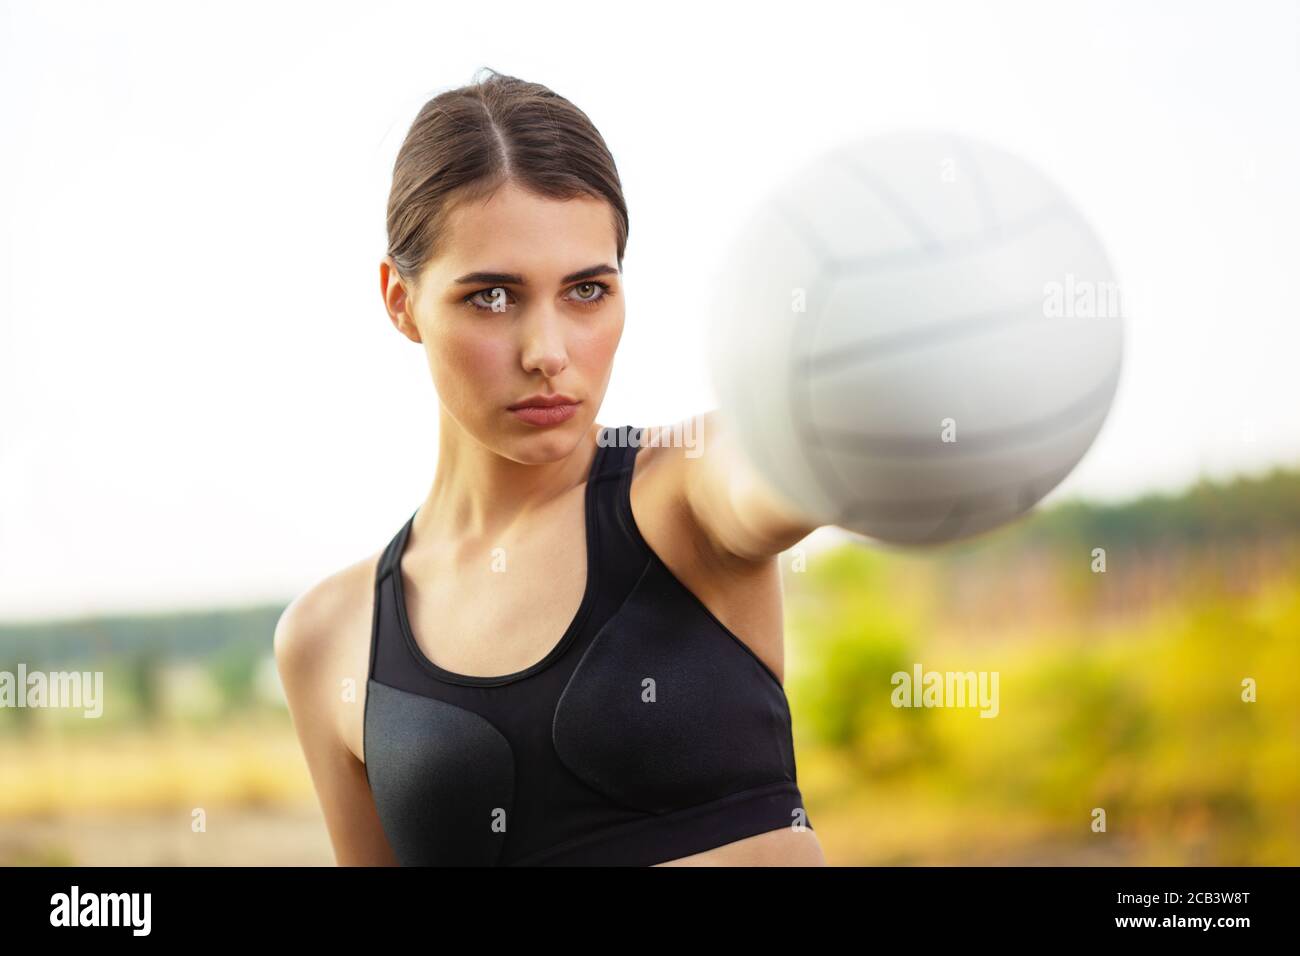 Girl athlete holding ball in outstretched hand Stock Photo